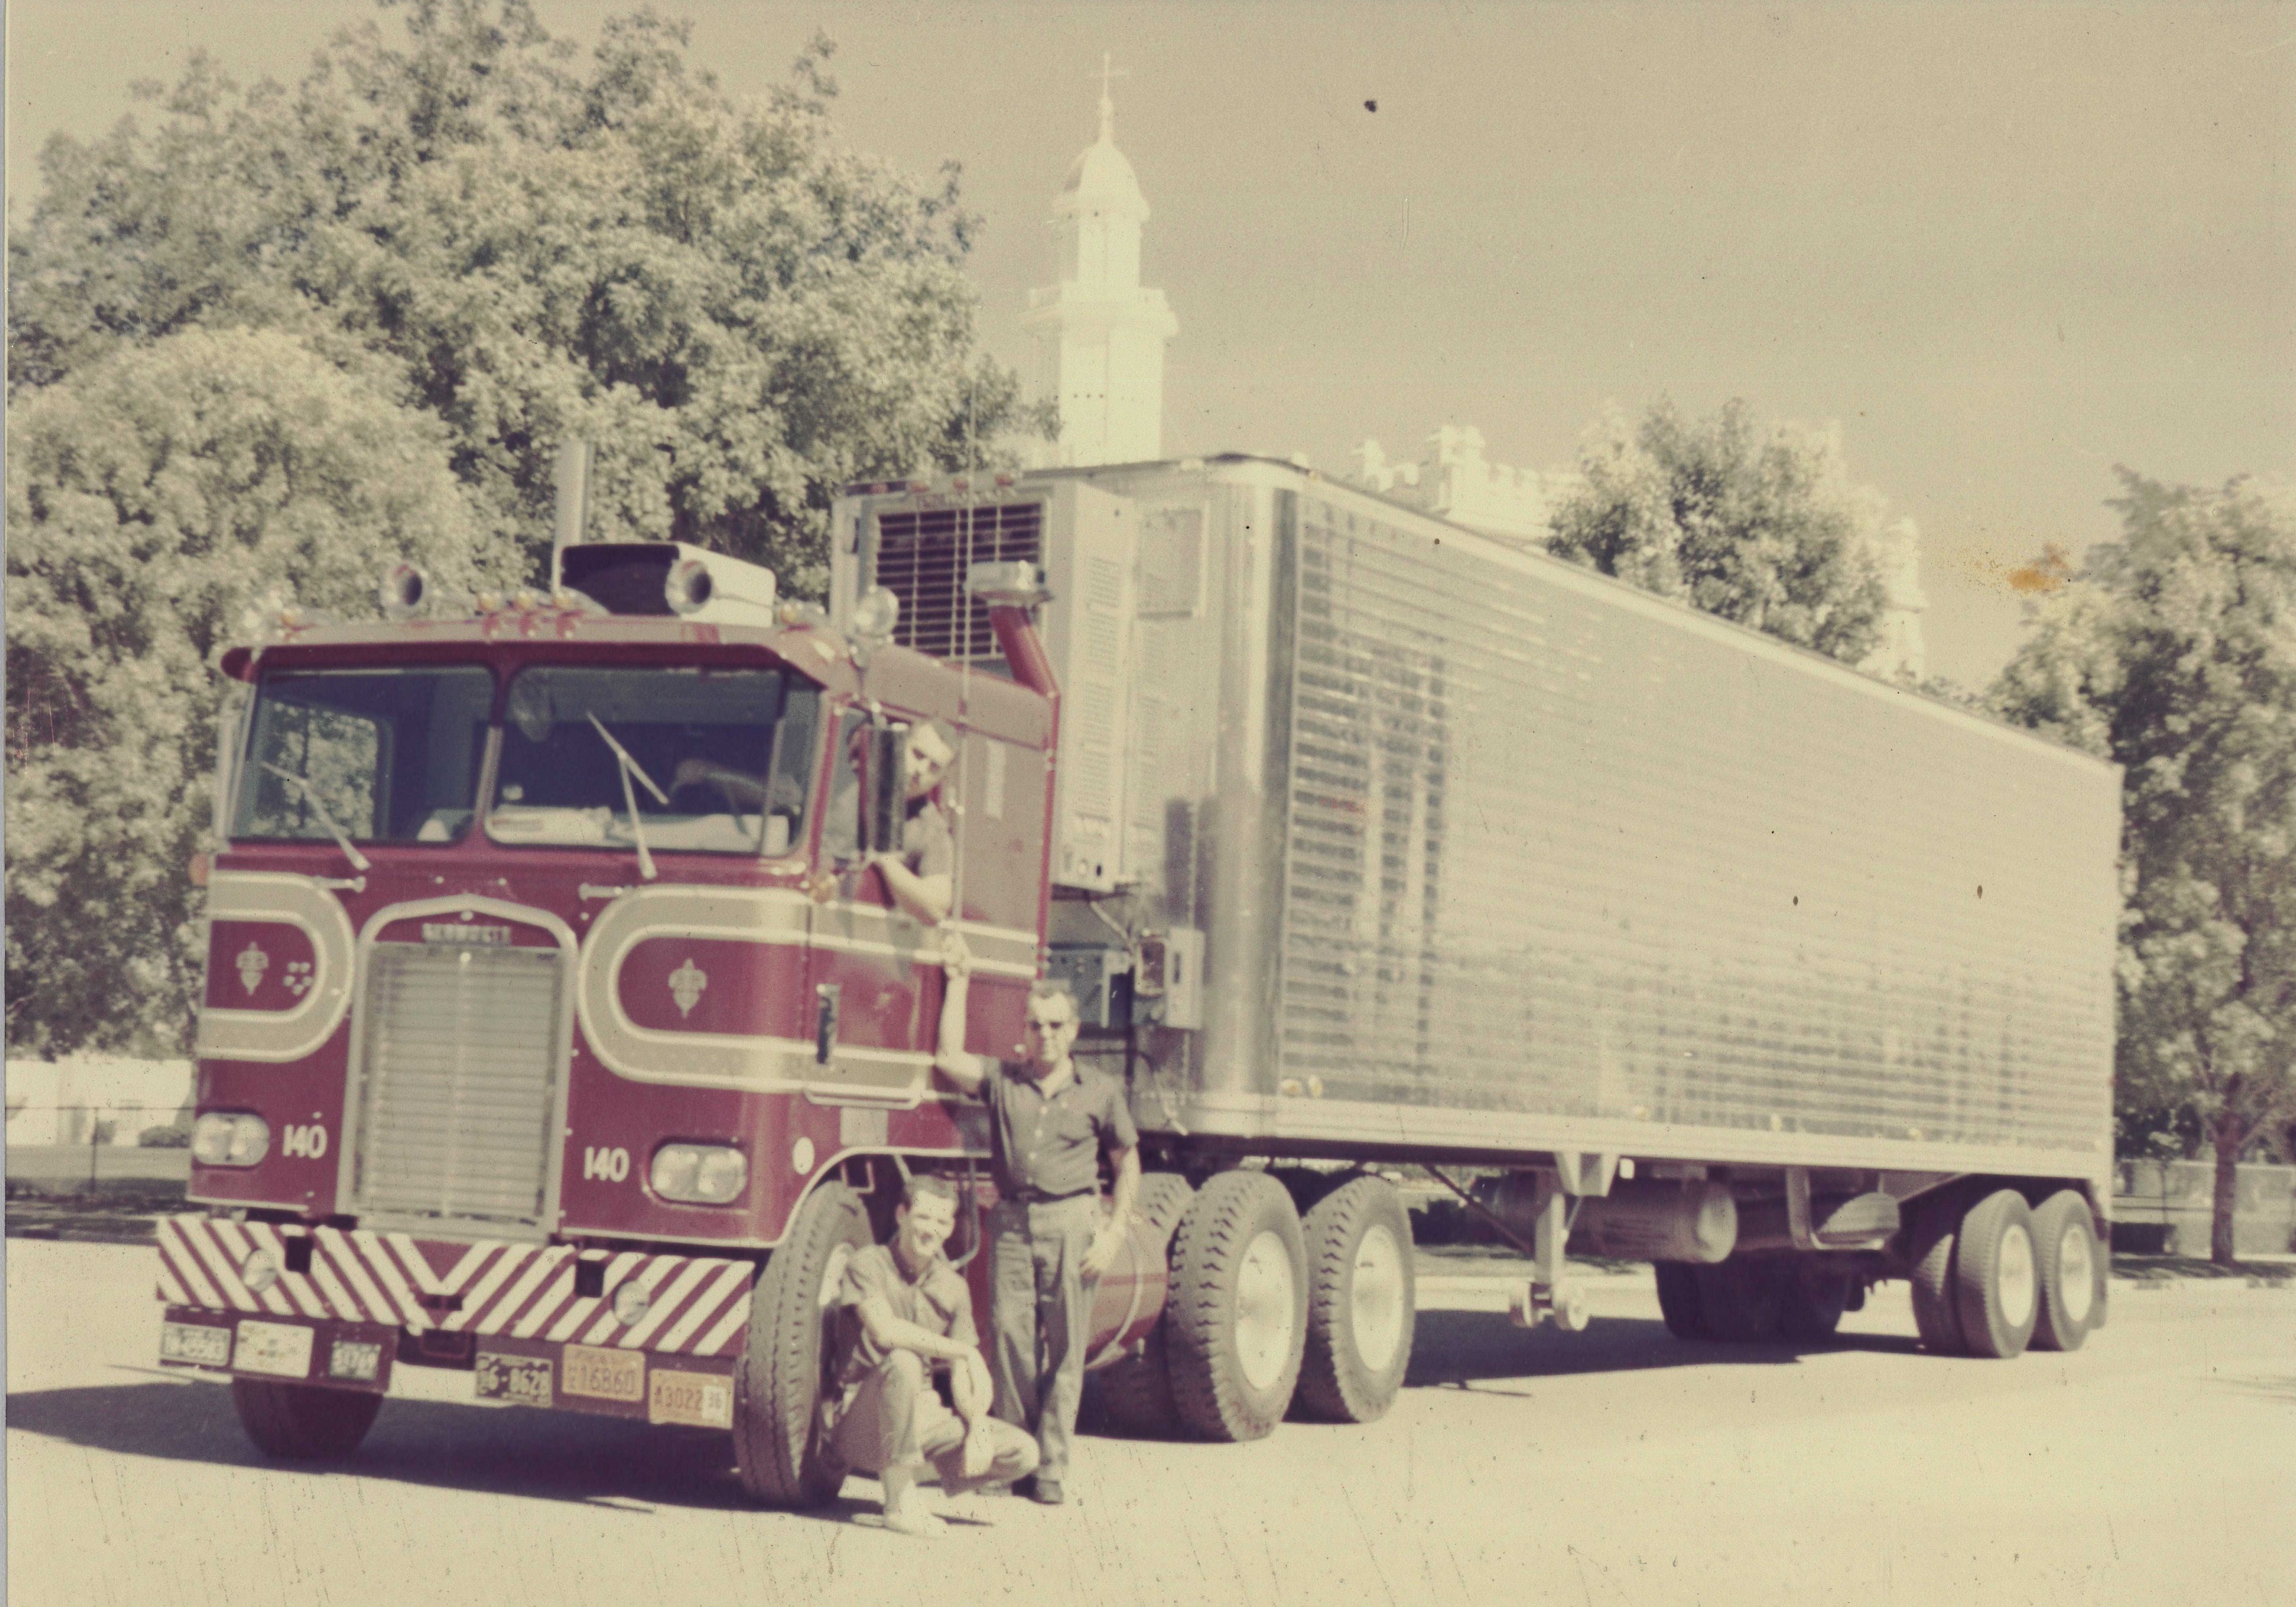 Some people with one of the old Cox Trucking trucks